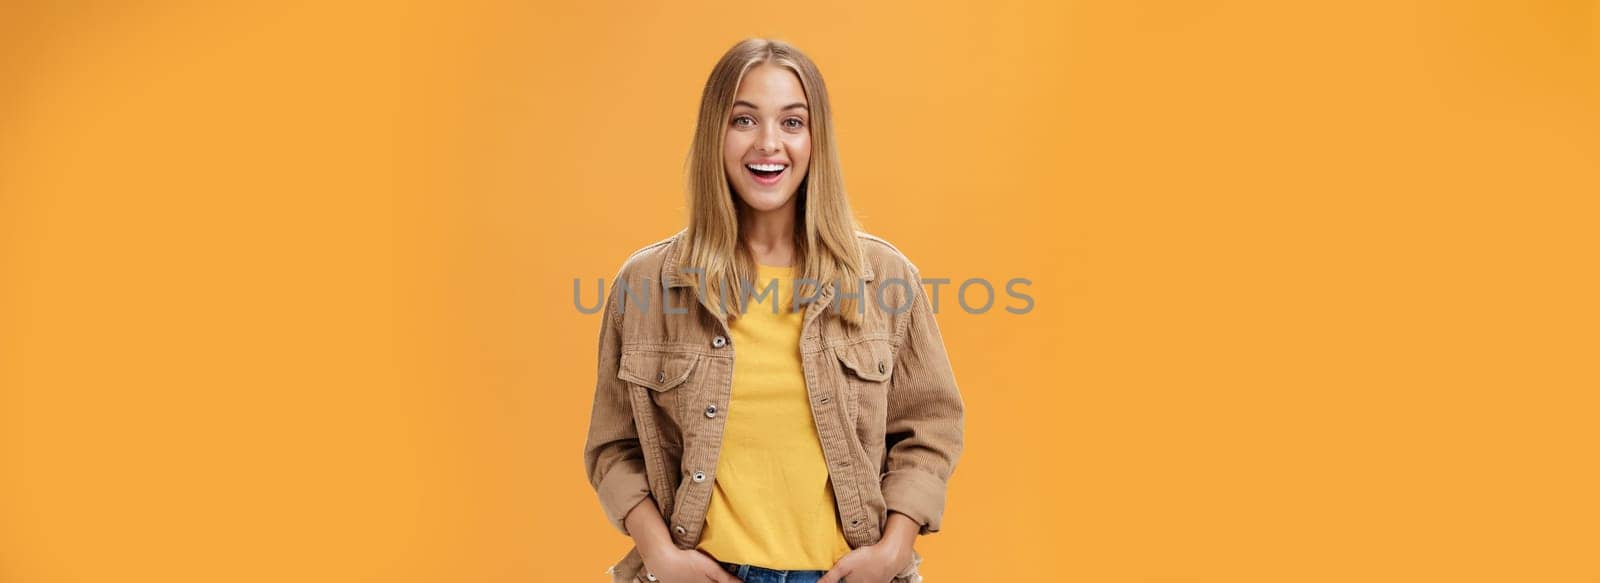 Charismatic tanned woman in corduroy jacket and yellow t-shirt ready for chilly autumn walk with friends smiling joyfully gazing entertained at camera holding hand in pockets casually over orange wall. Lifestyle.